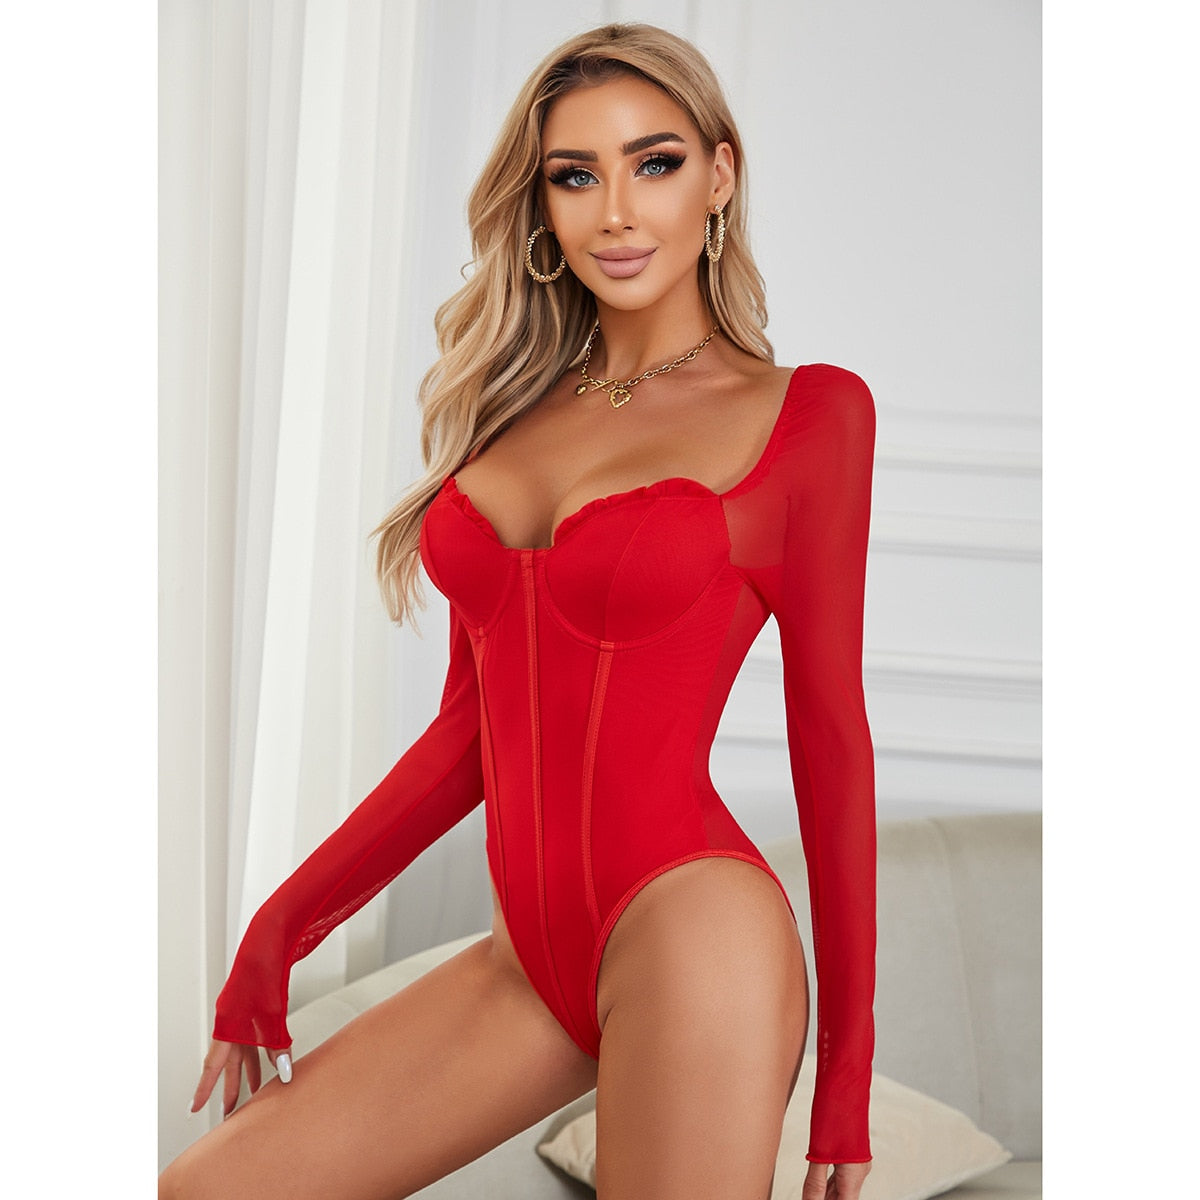 Lace Bodysuit Playsuit Romper Bottom Summer Thin Bodysuits Womens Clothing Ropa De Mujer Sexy Nightclub Overalls Jumpsuit Women 15-10740-red